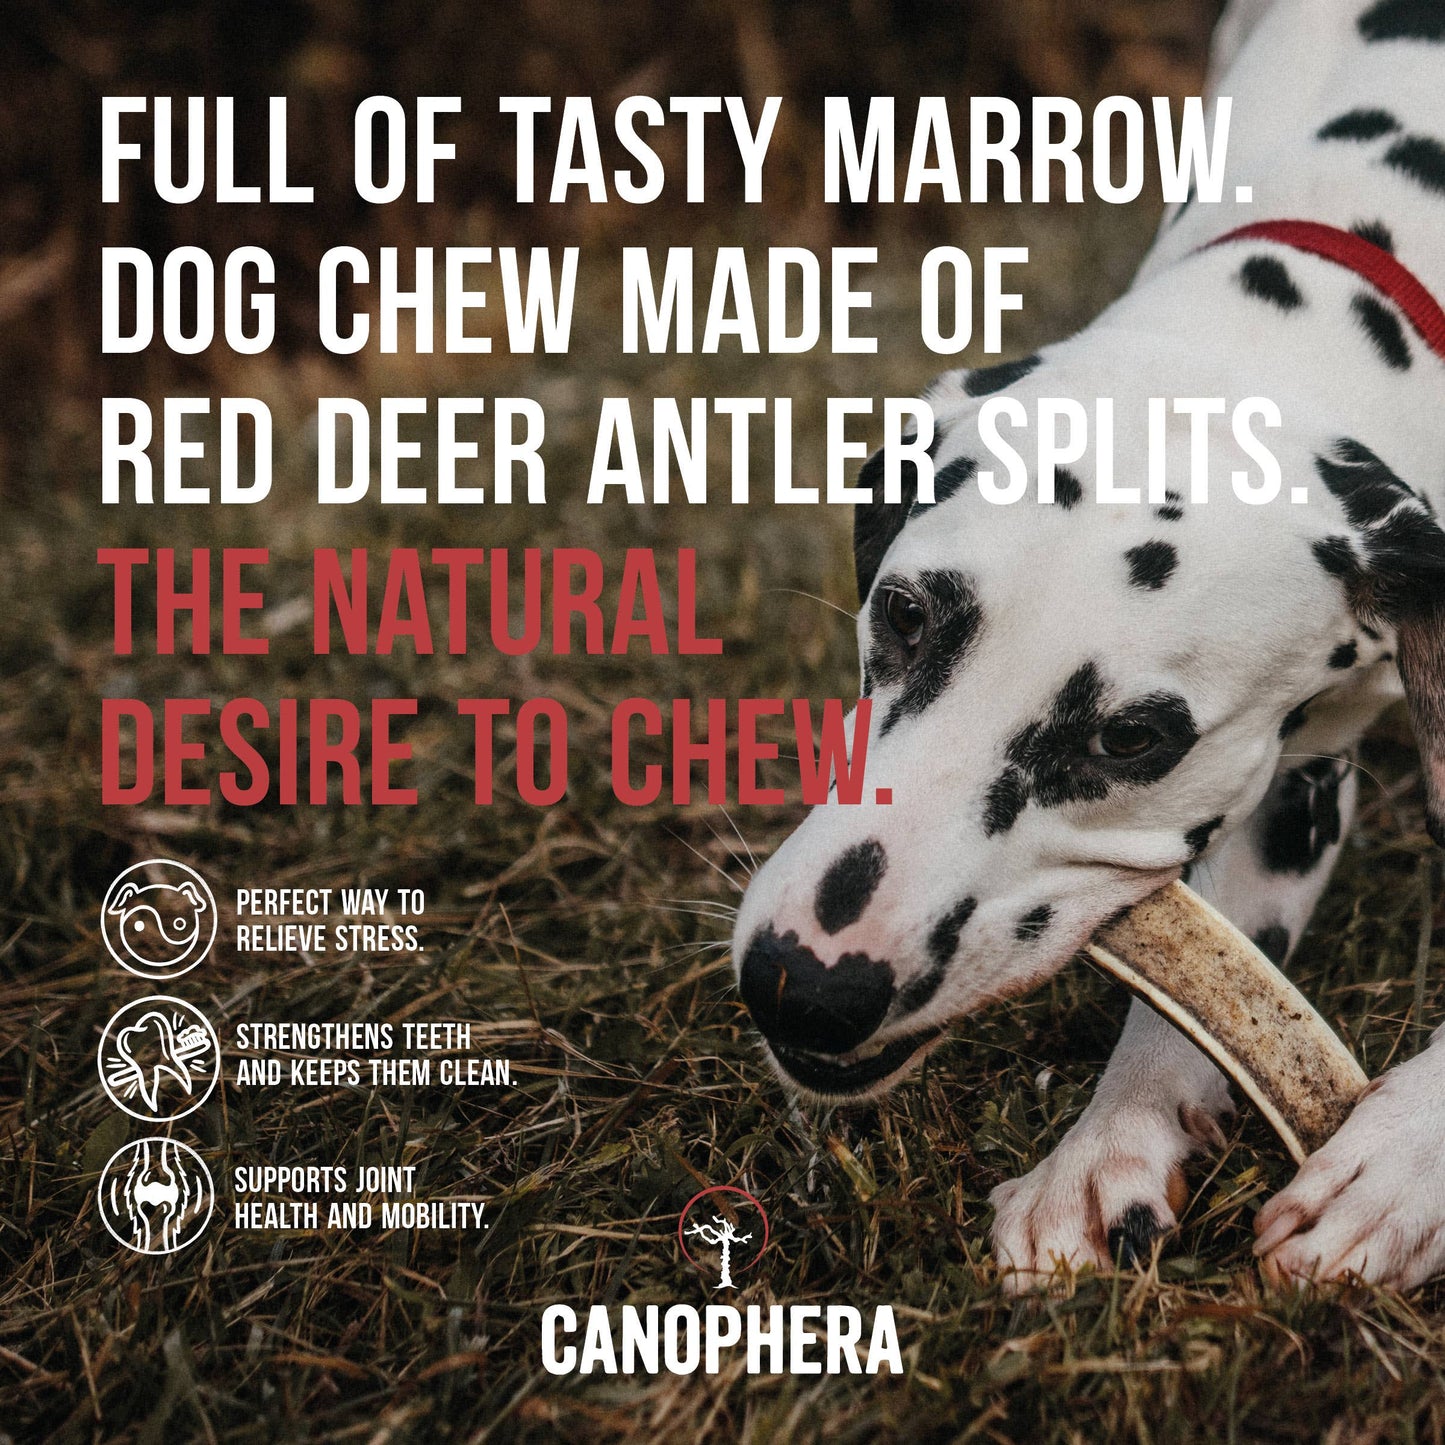 Dog Chew Made of Red Deer Antler Splits.: English / XS